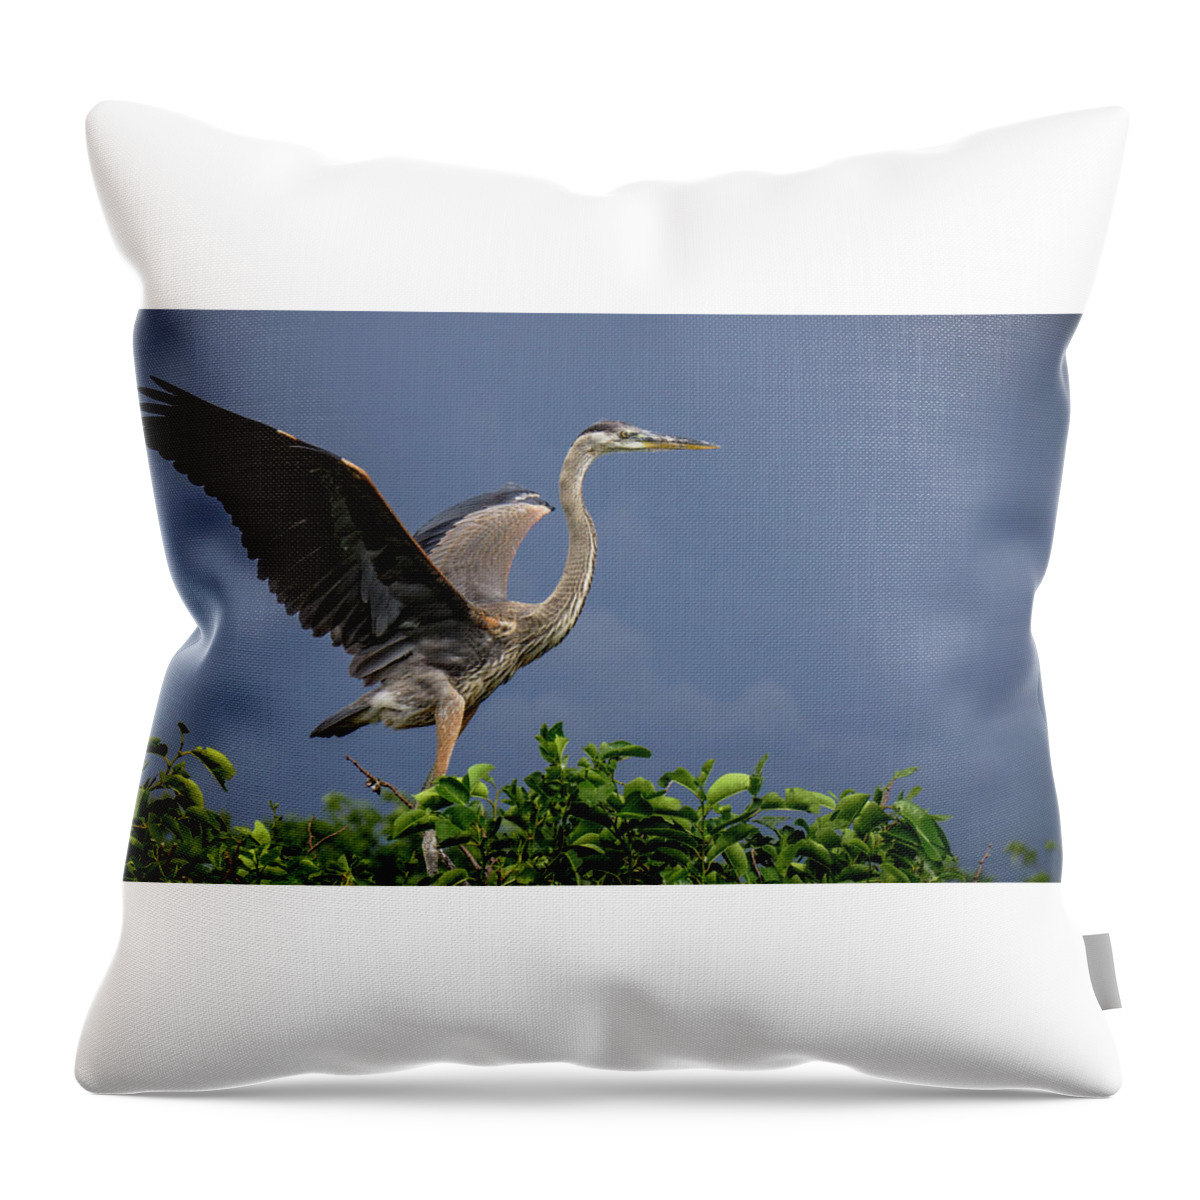 Florida Throw Pillow featuring the photograph Great Blue Heron Delray Beach Florida by Lawrence S Richardson Jr